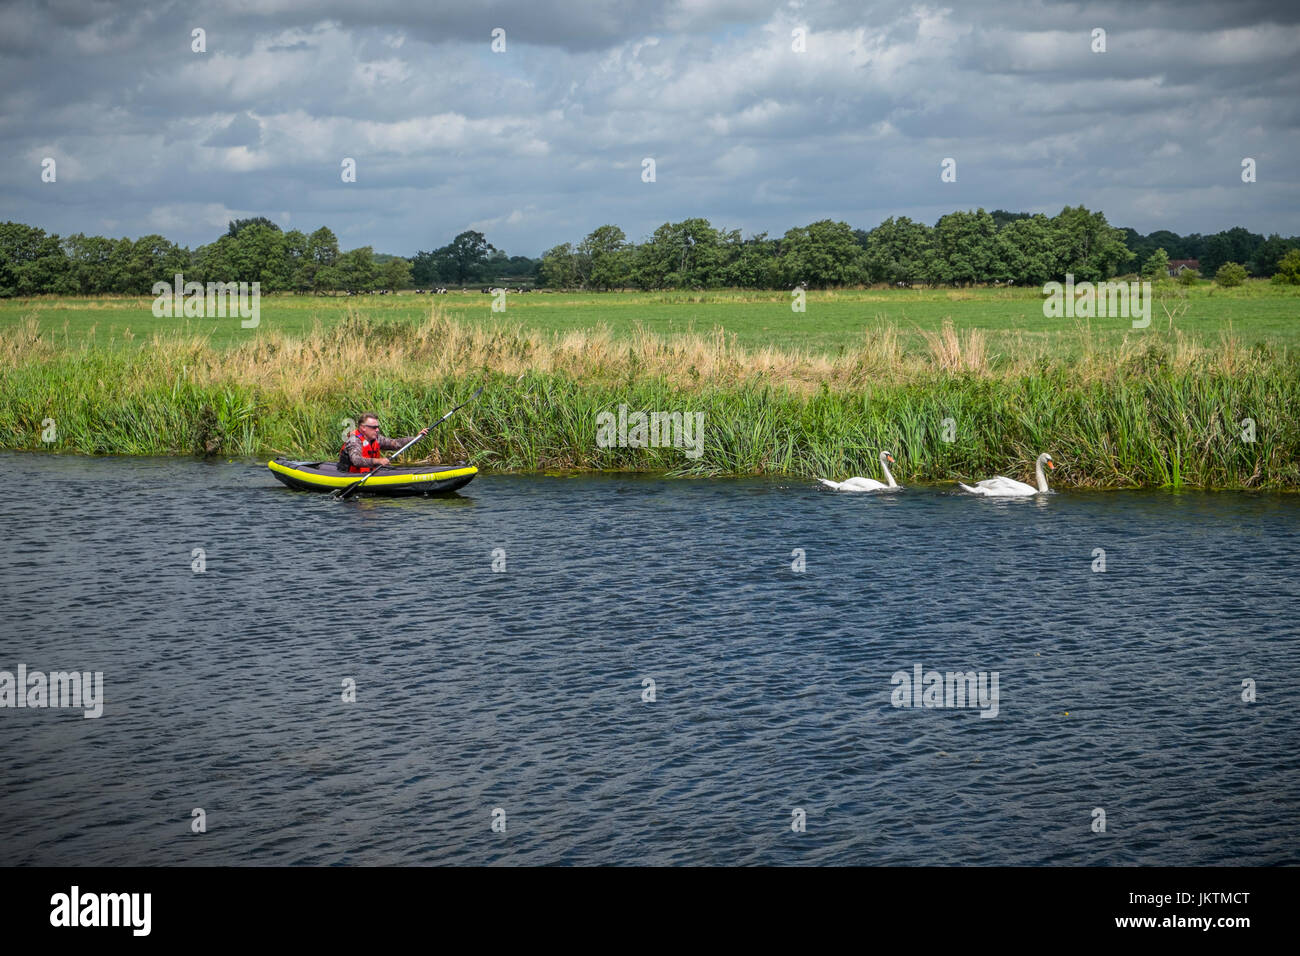 Canoeing an inflateable canoe on the river Waveney, Geldeston Lock, Norfolk, East Anglia, lead by two swans. Stock Photo